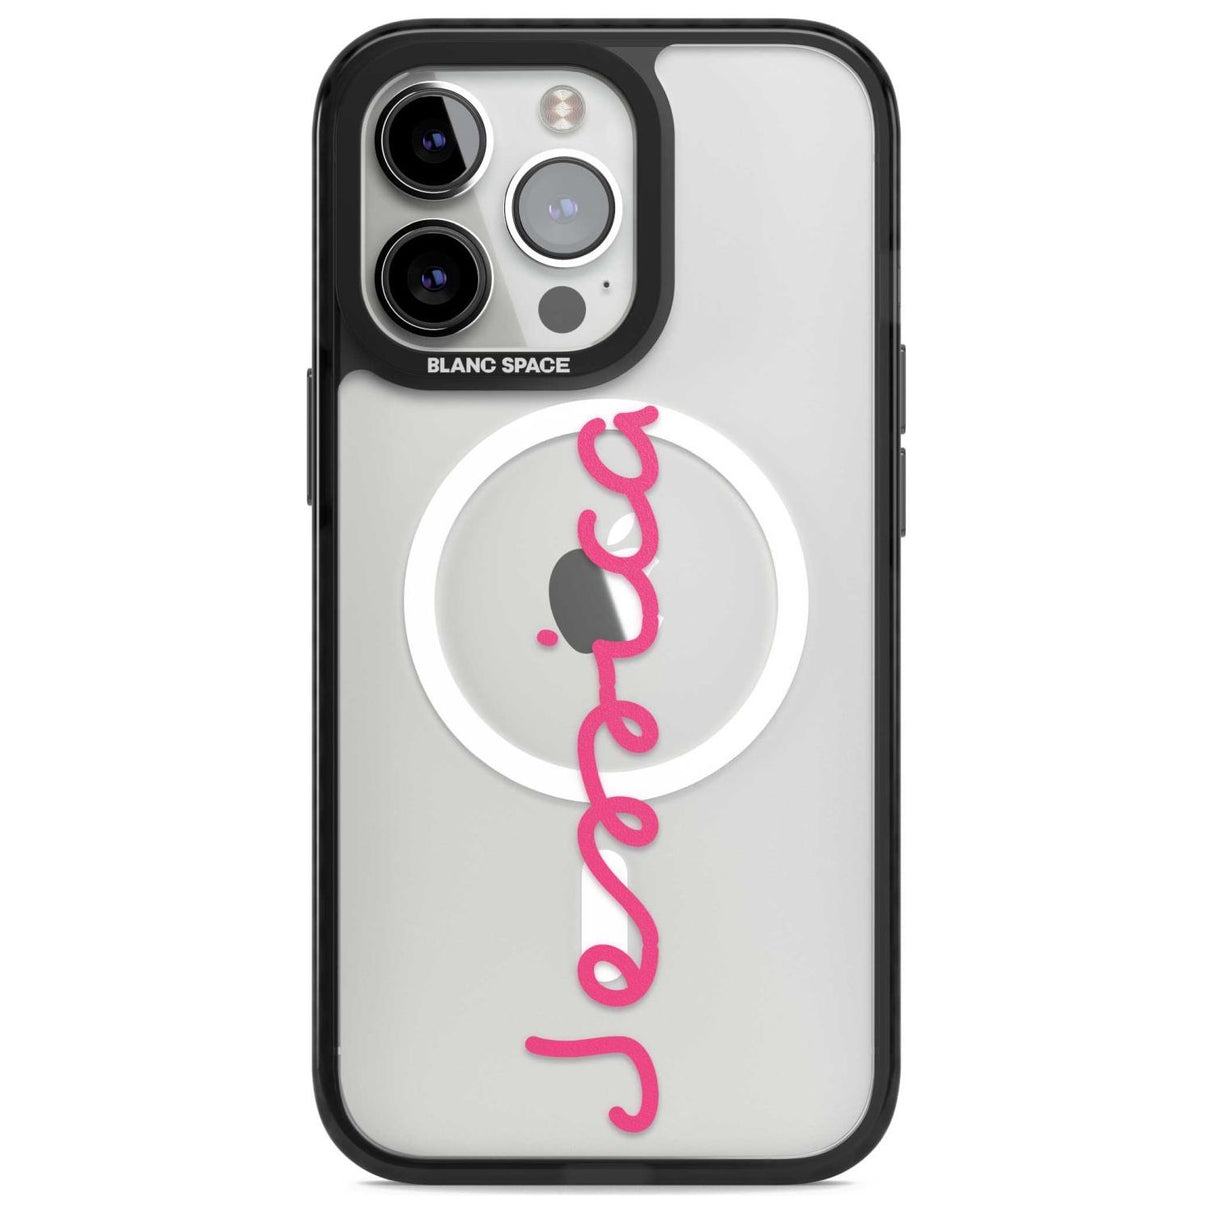 Personalised Summer Name Custom Phone Case iPhone 15 Pro Max / Magsafe Black Impact Case,iPhone 15 Pro / Magsafe Black Impact Case,iPhone 14 Pro Max / Magsafe Black Impact Case,iPhone 14 Pro / Magsafe Black Impact Case,iPhone 13 Pro / Magsafe Black Impact Case Blanc Space